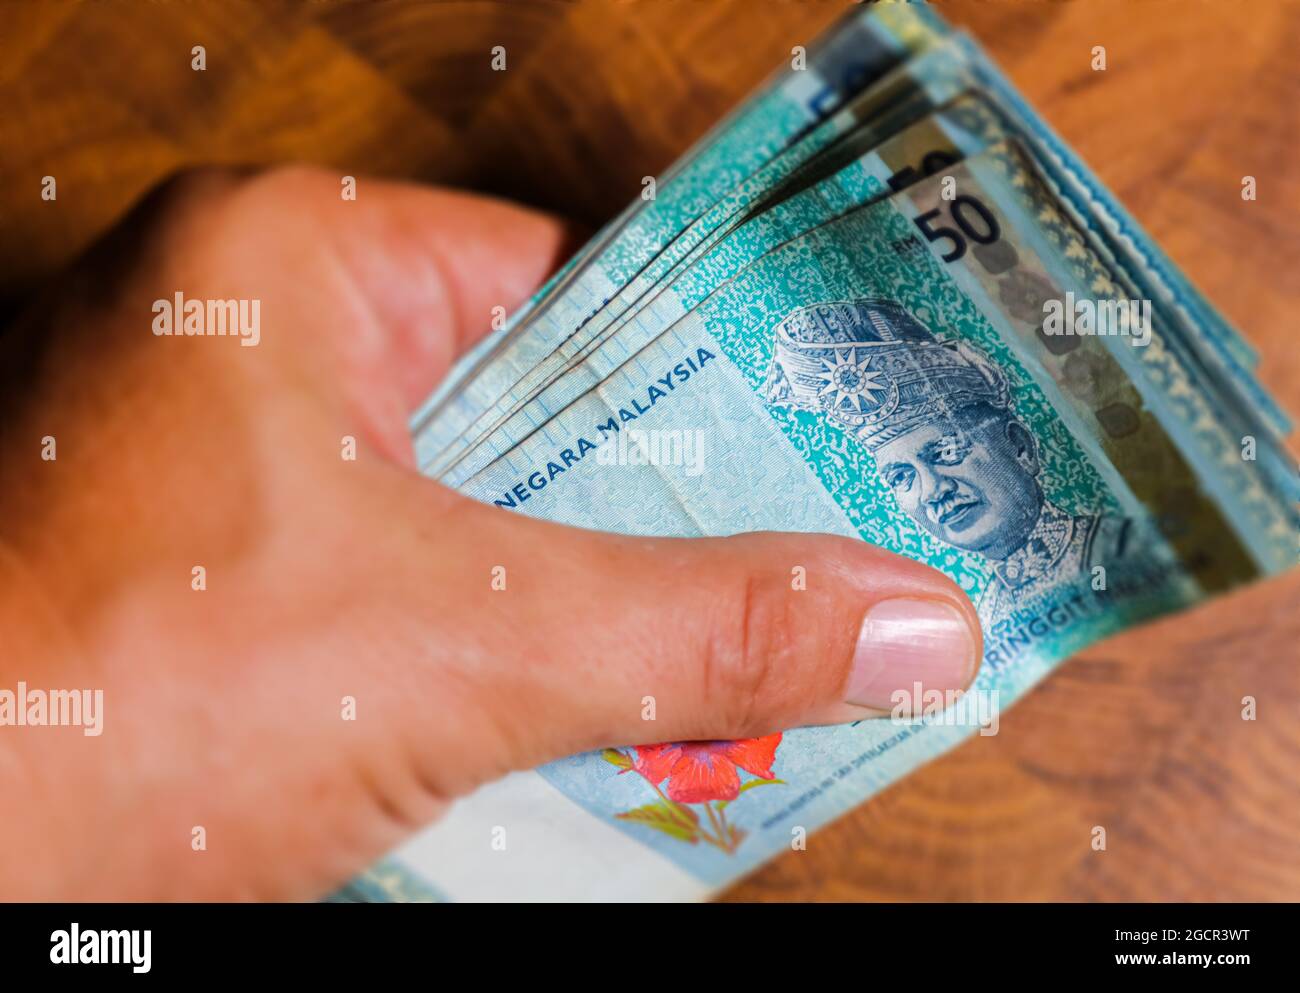 A collection of Fifty malaysian ringgit banknotes in a male hand. Man hand show Malaysia Ringgit banknotes. Boys hands holding money of Malaysia. Asia Stock Photo